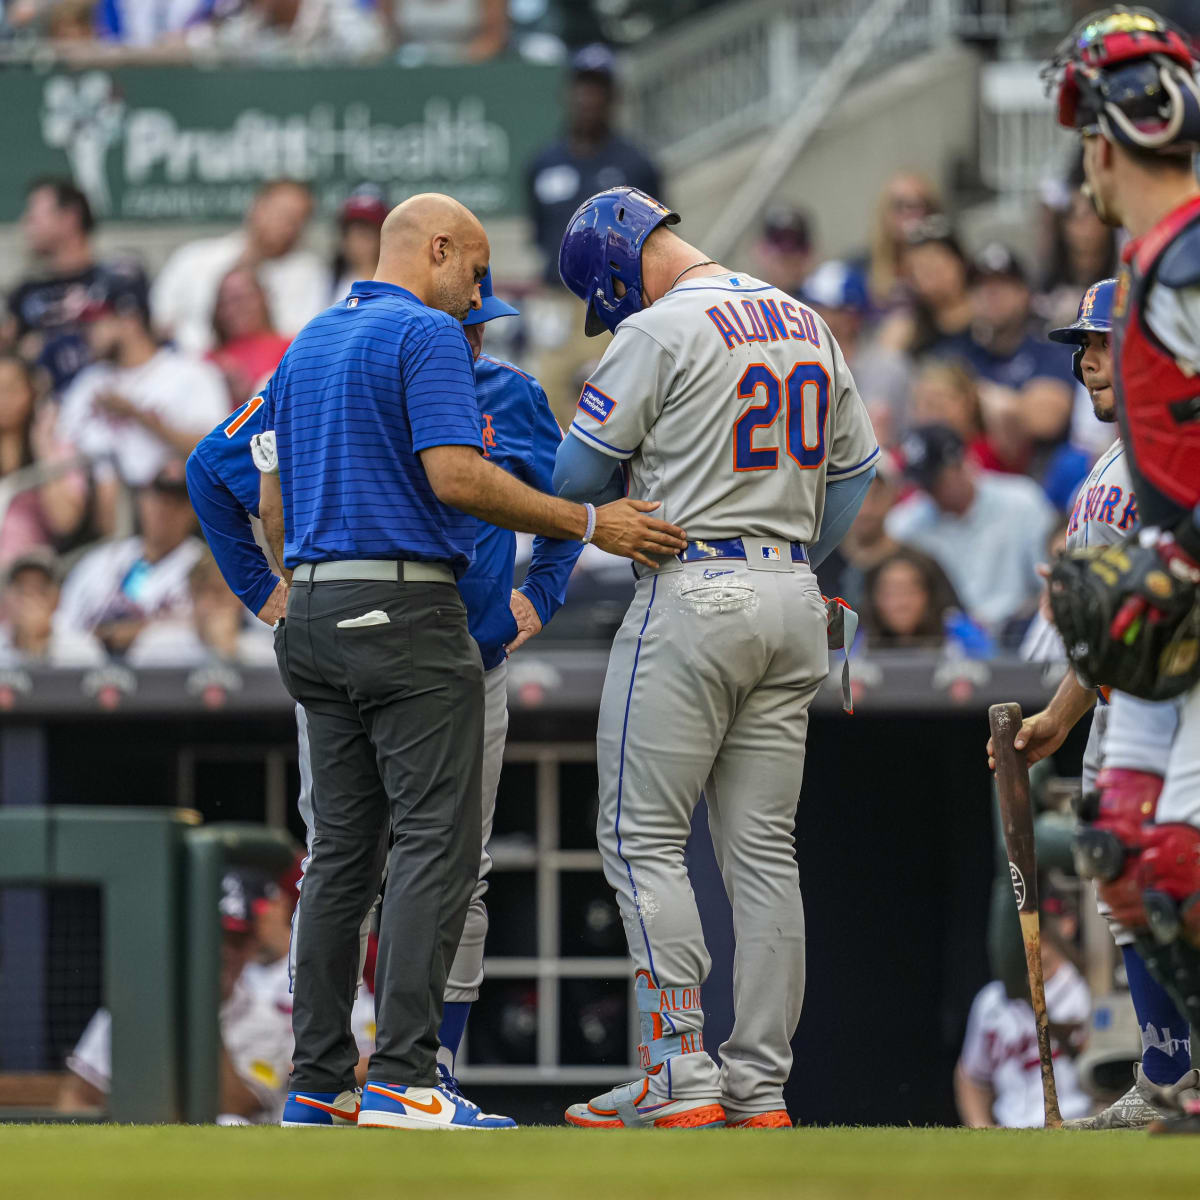 Mets place slugger Pete Alonso on the injured list